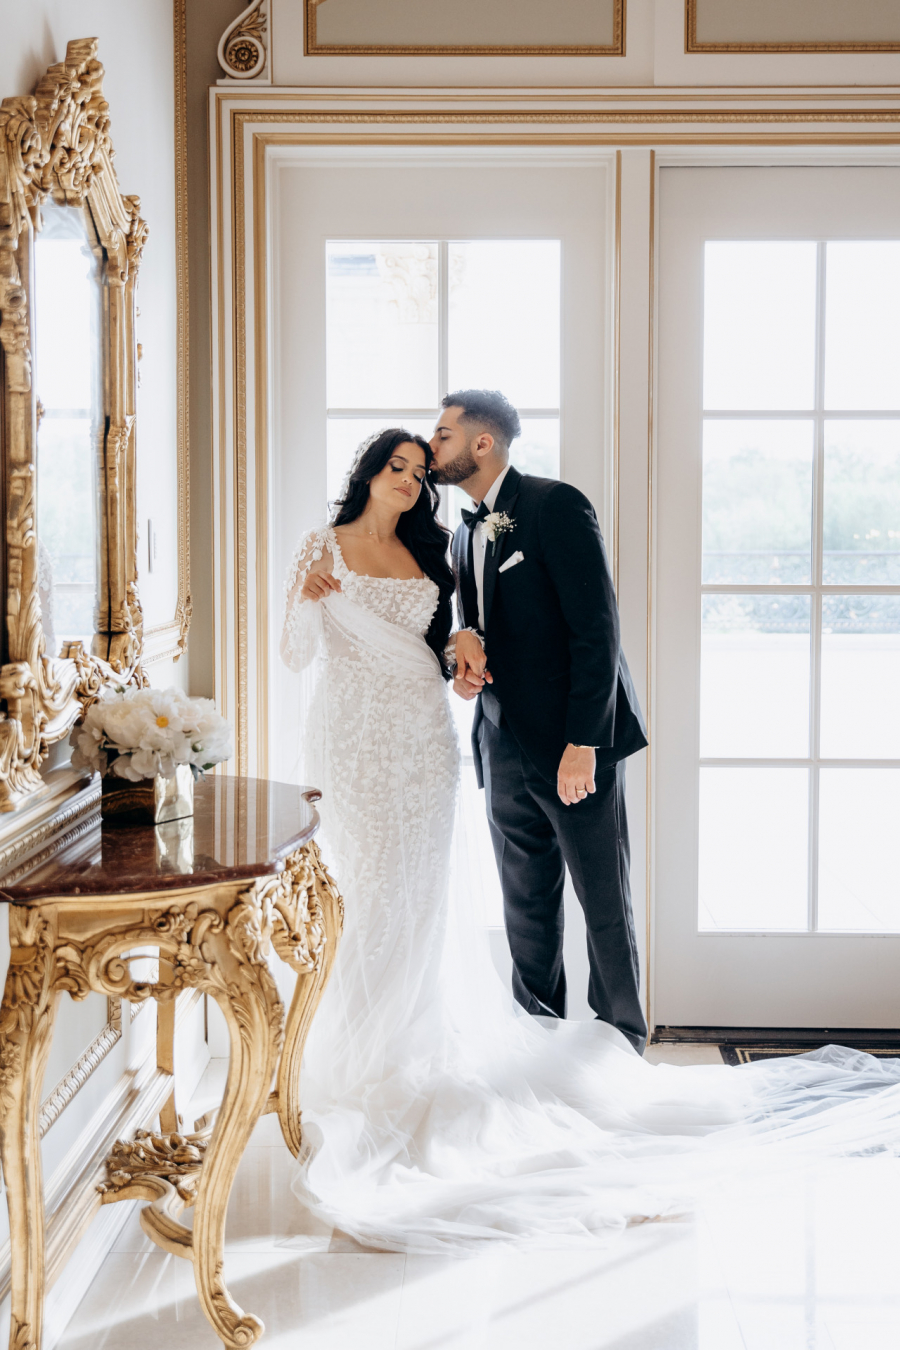 Egyprian coptic wedding editorial style in New Jersey 59